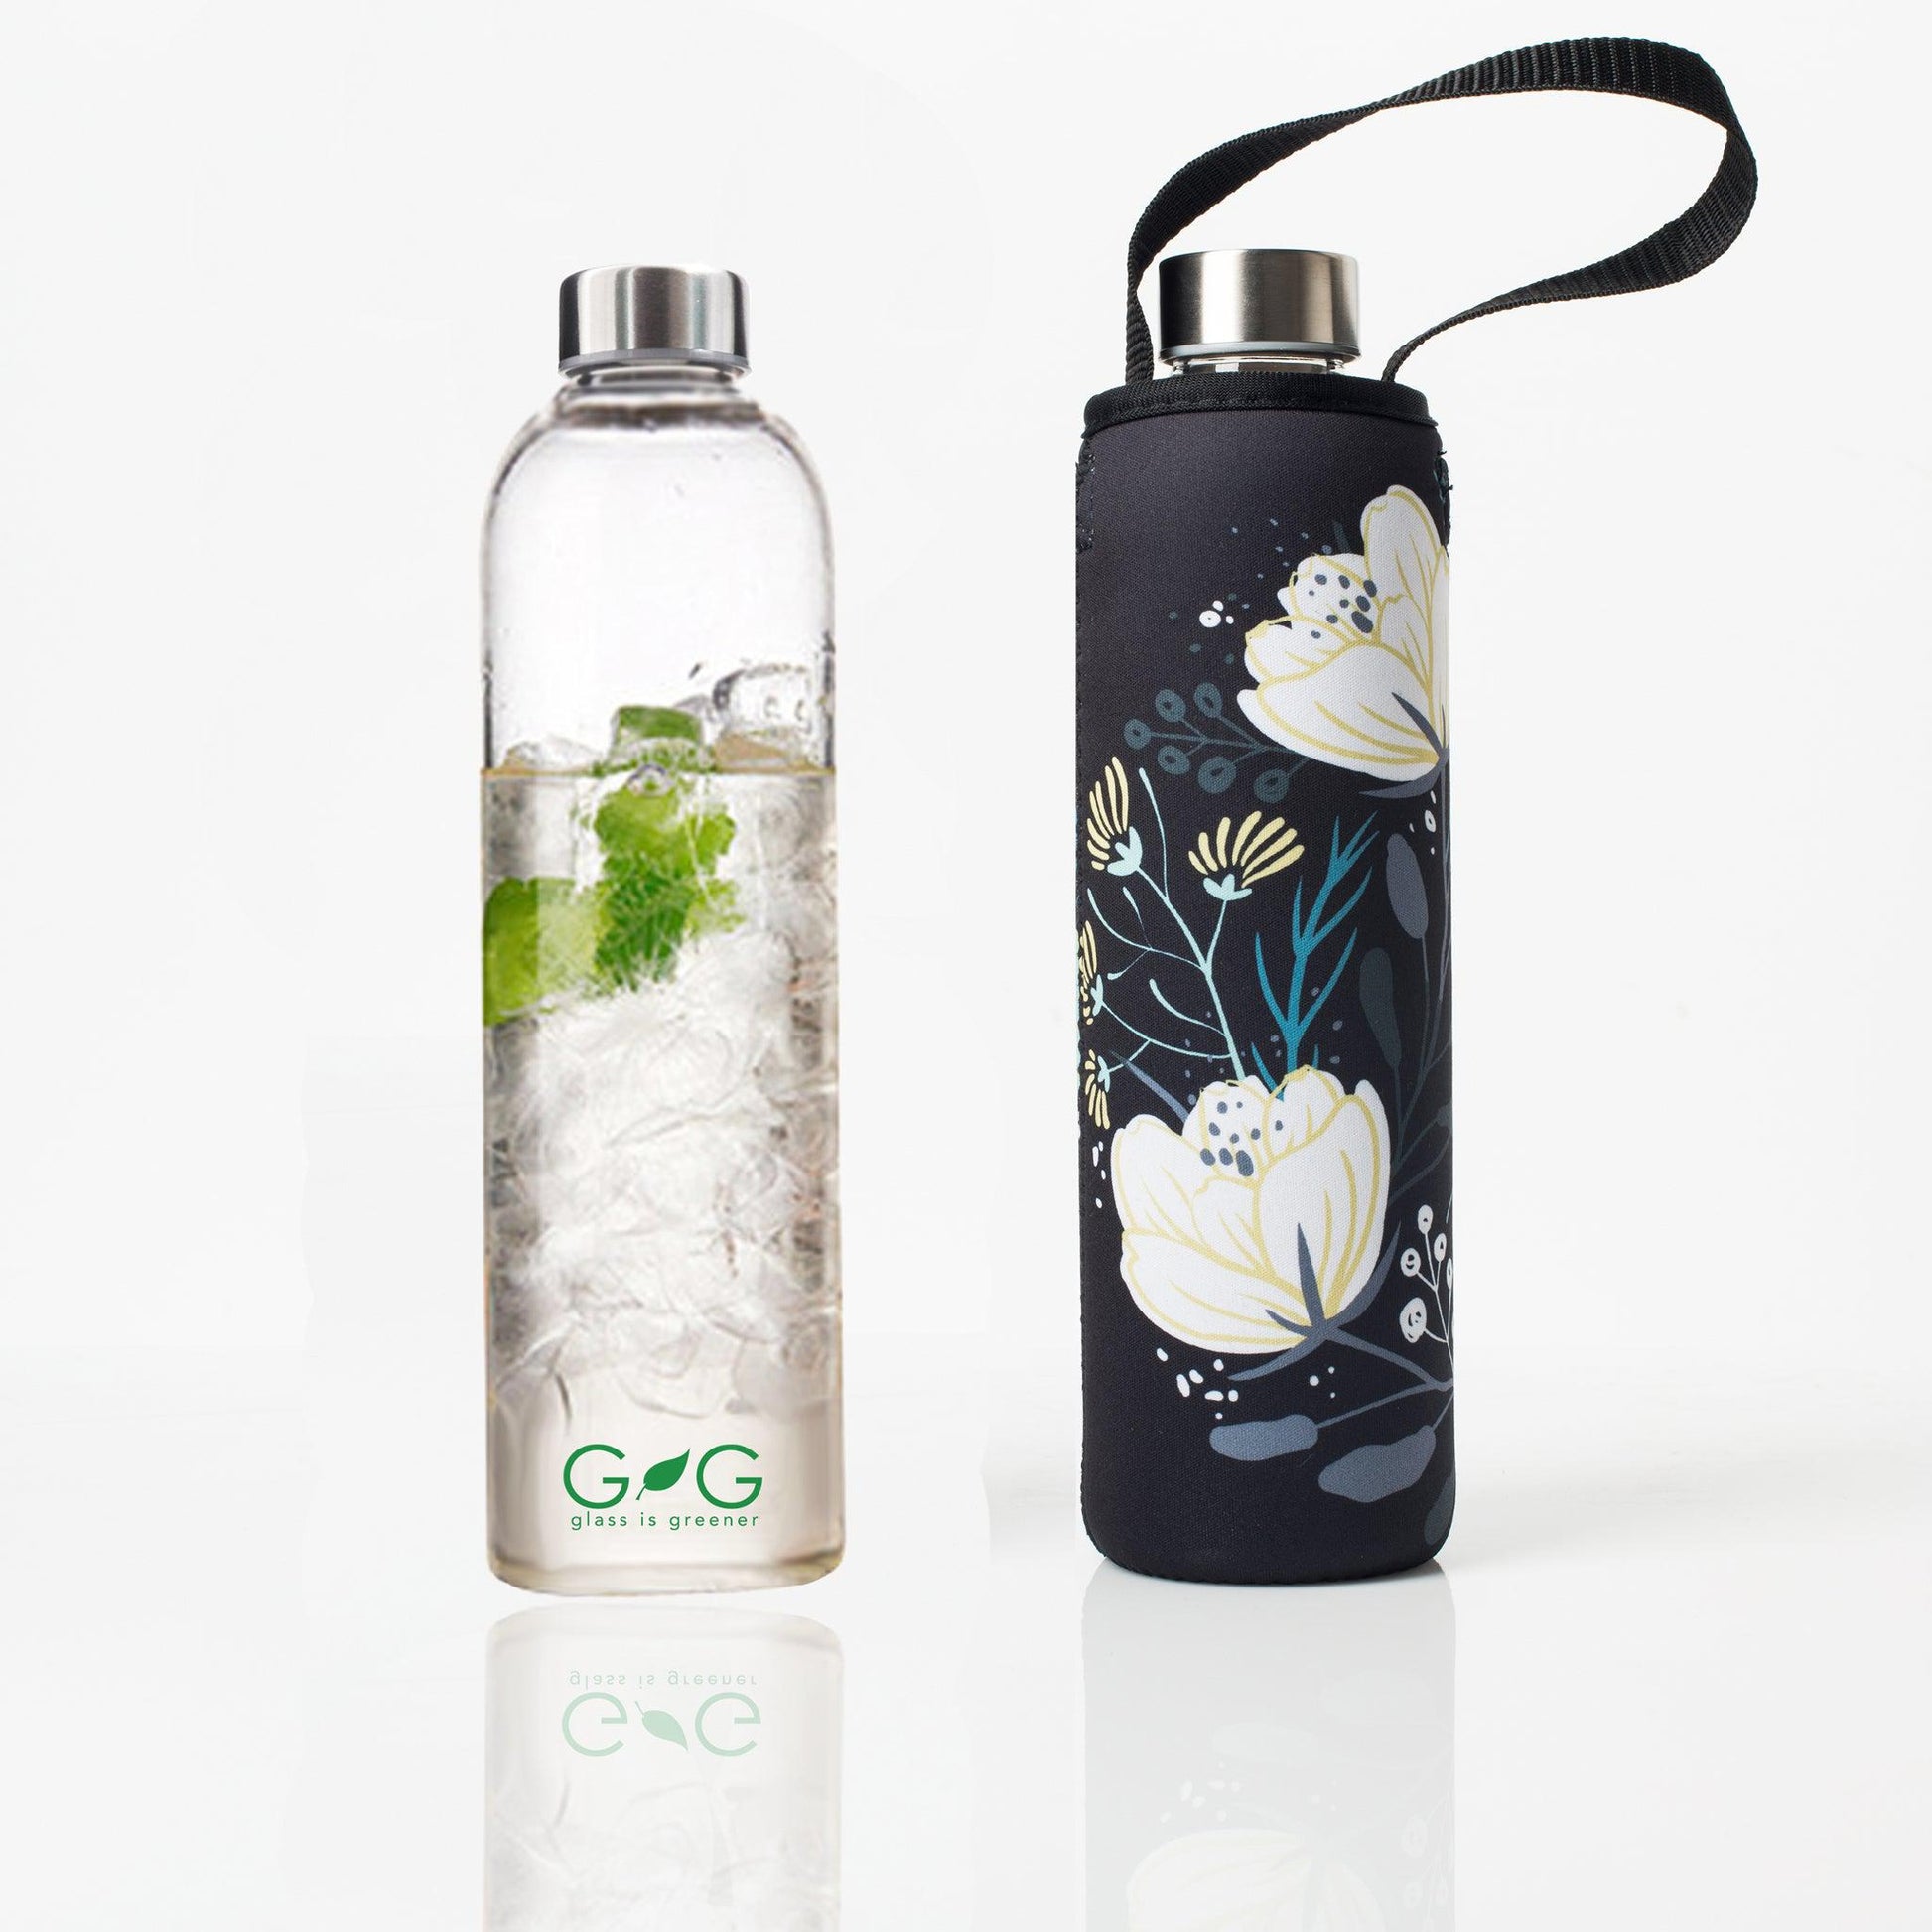 'Glass is Greener' 25 oz Travel Bottle and 'Orient' Carry Cover by BBBYO-BBBYO